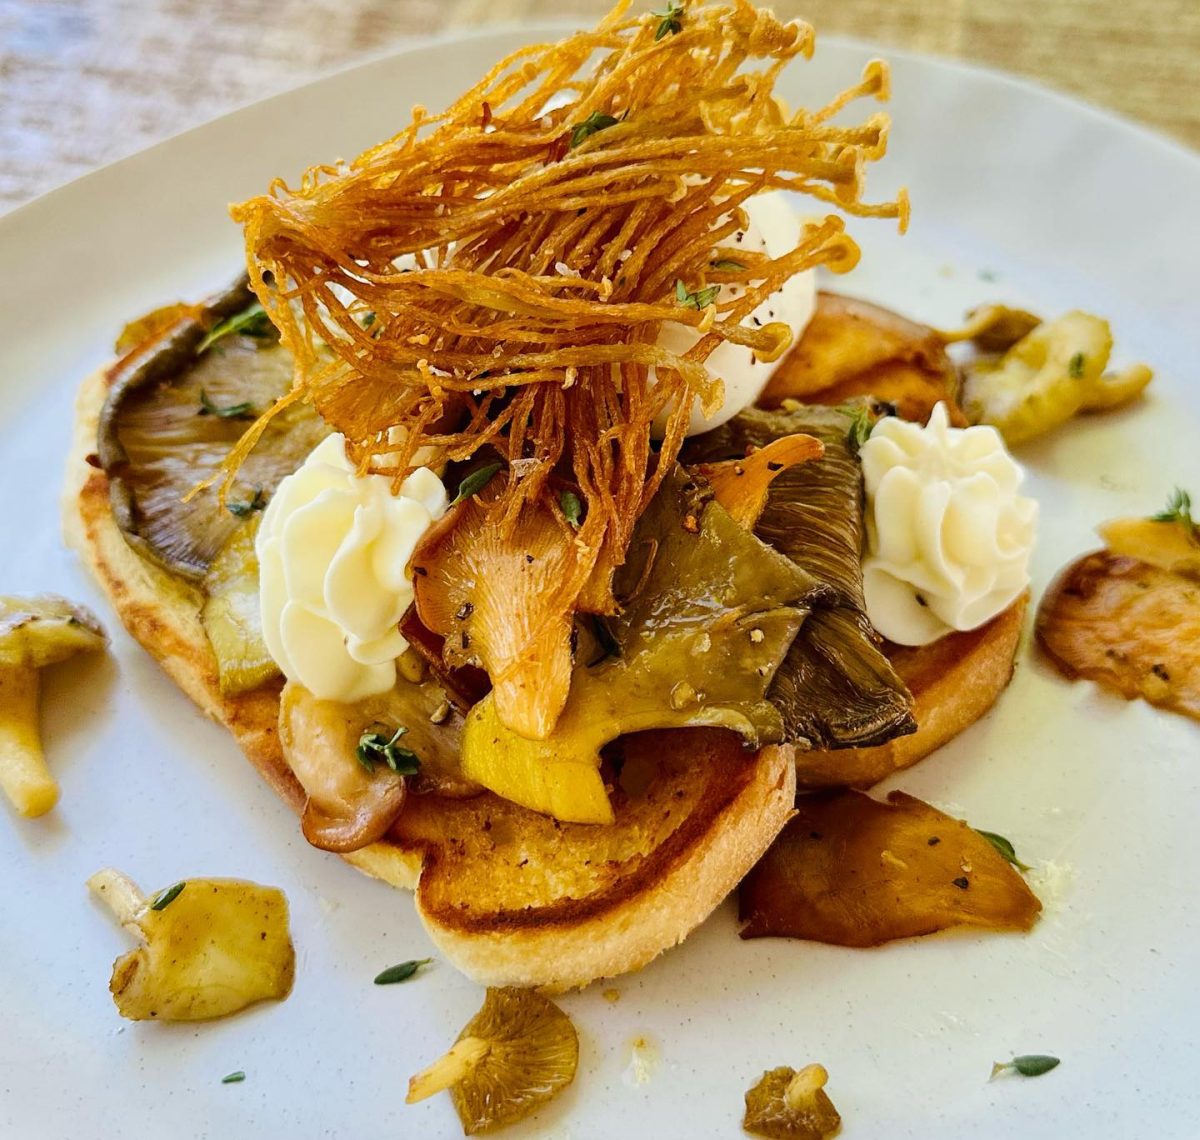 Snowy mountain mushrooms, donegal farm eggs (poached), whipped ricotta and fried enoki on toasted sourdough